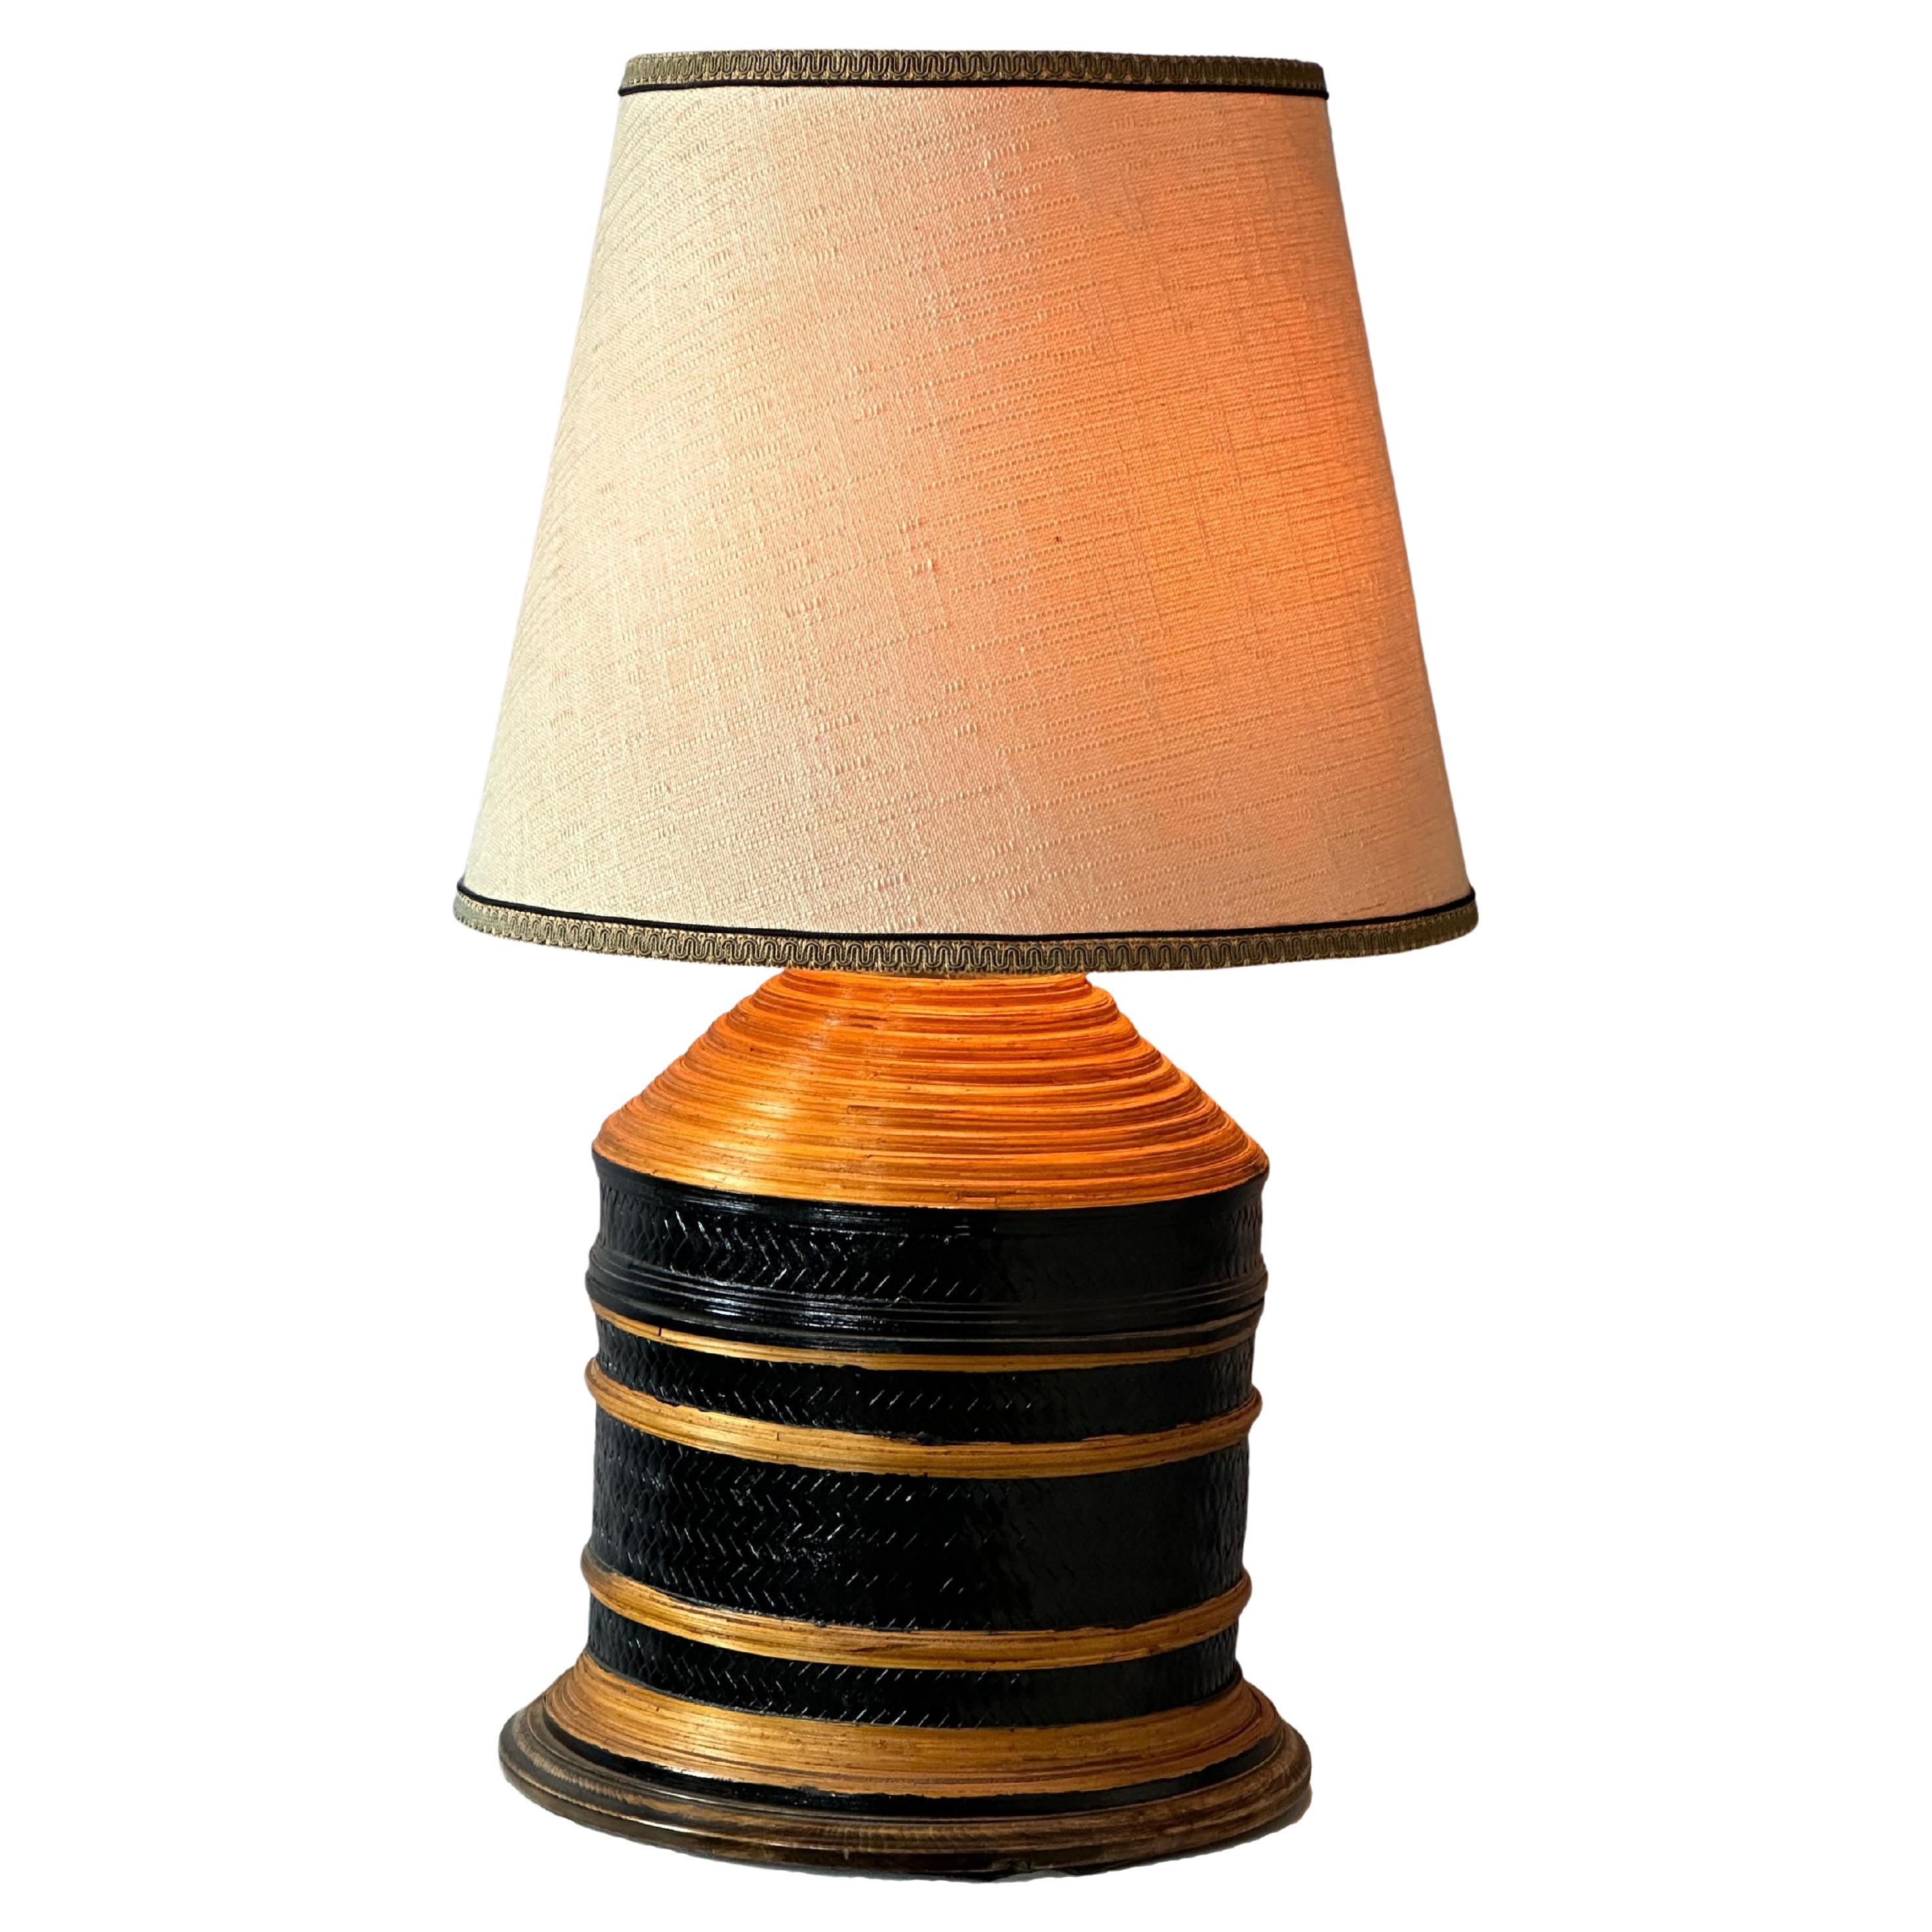  Large Decorative Blonde and Black Color Cane Table Lamp For Sale